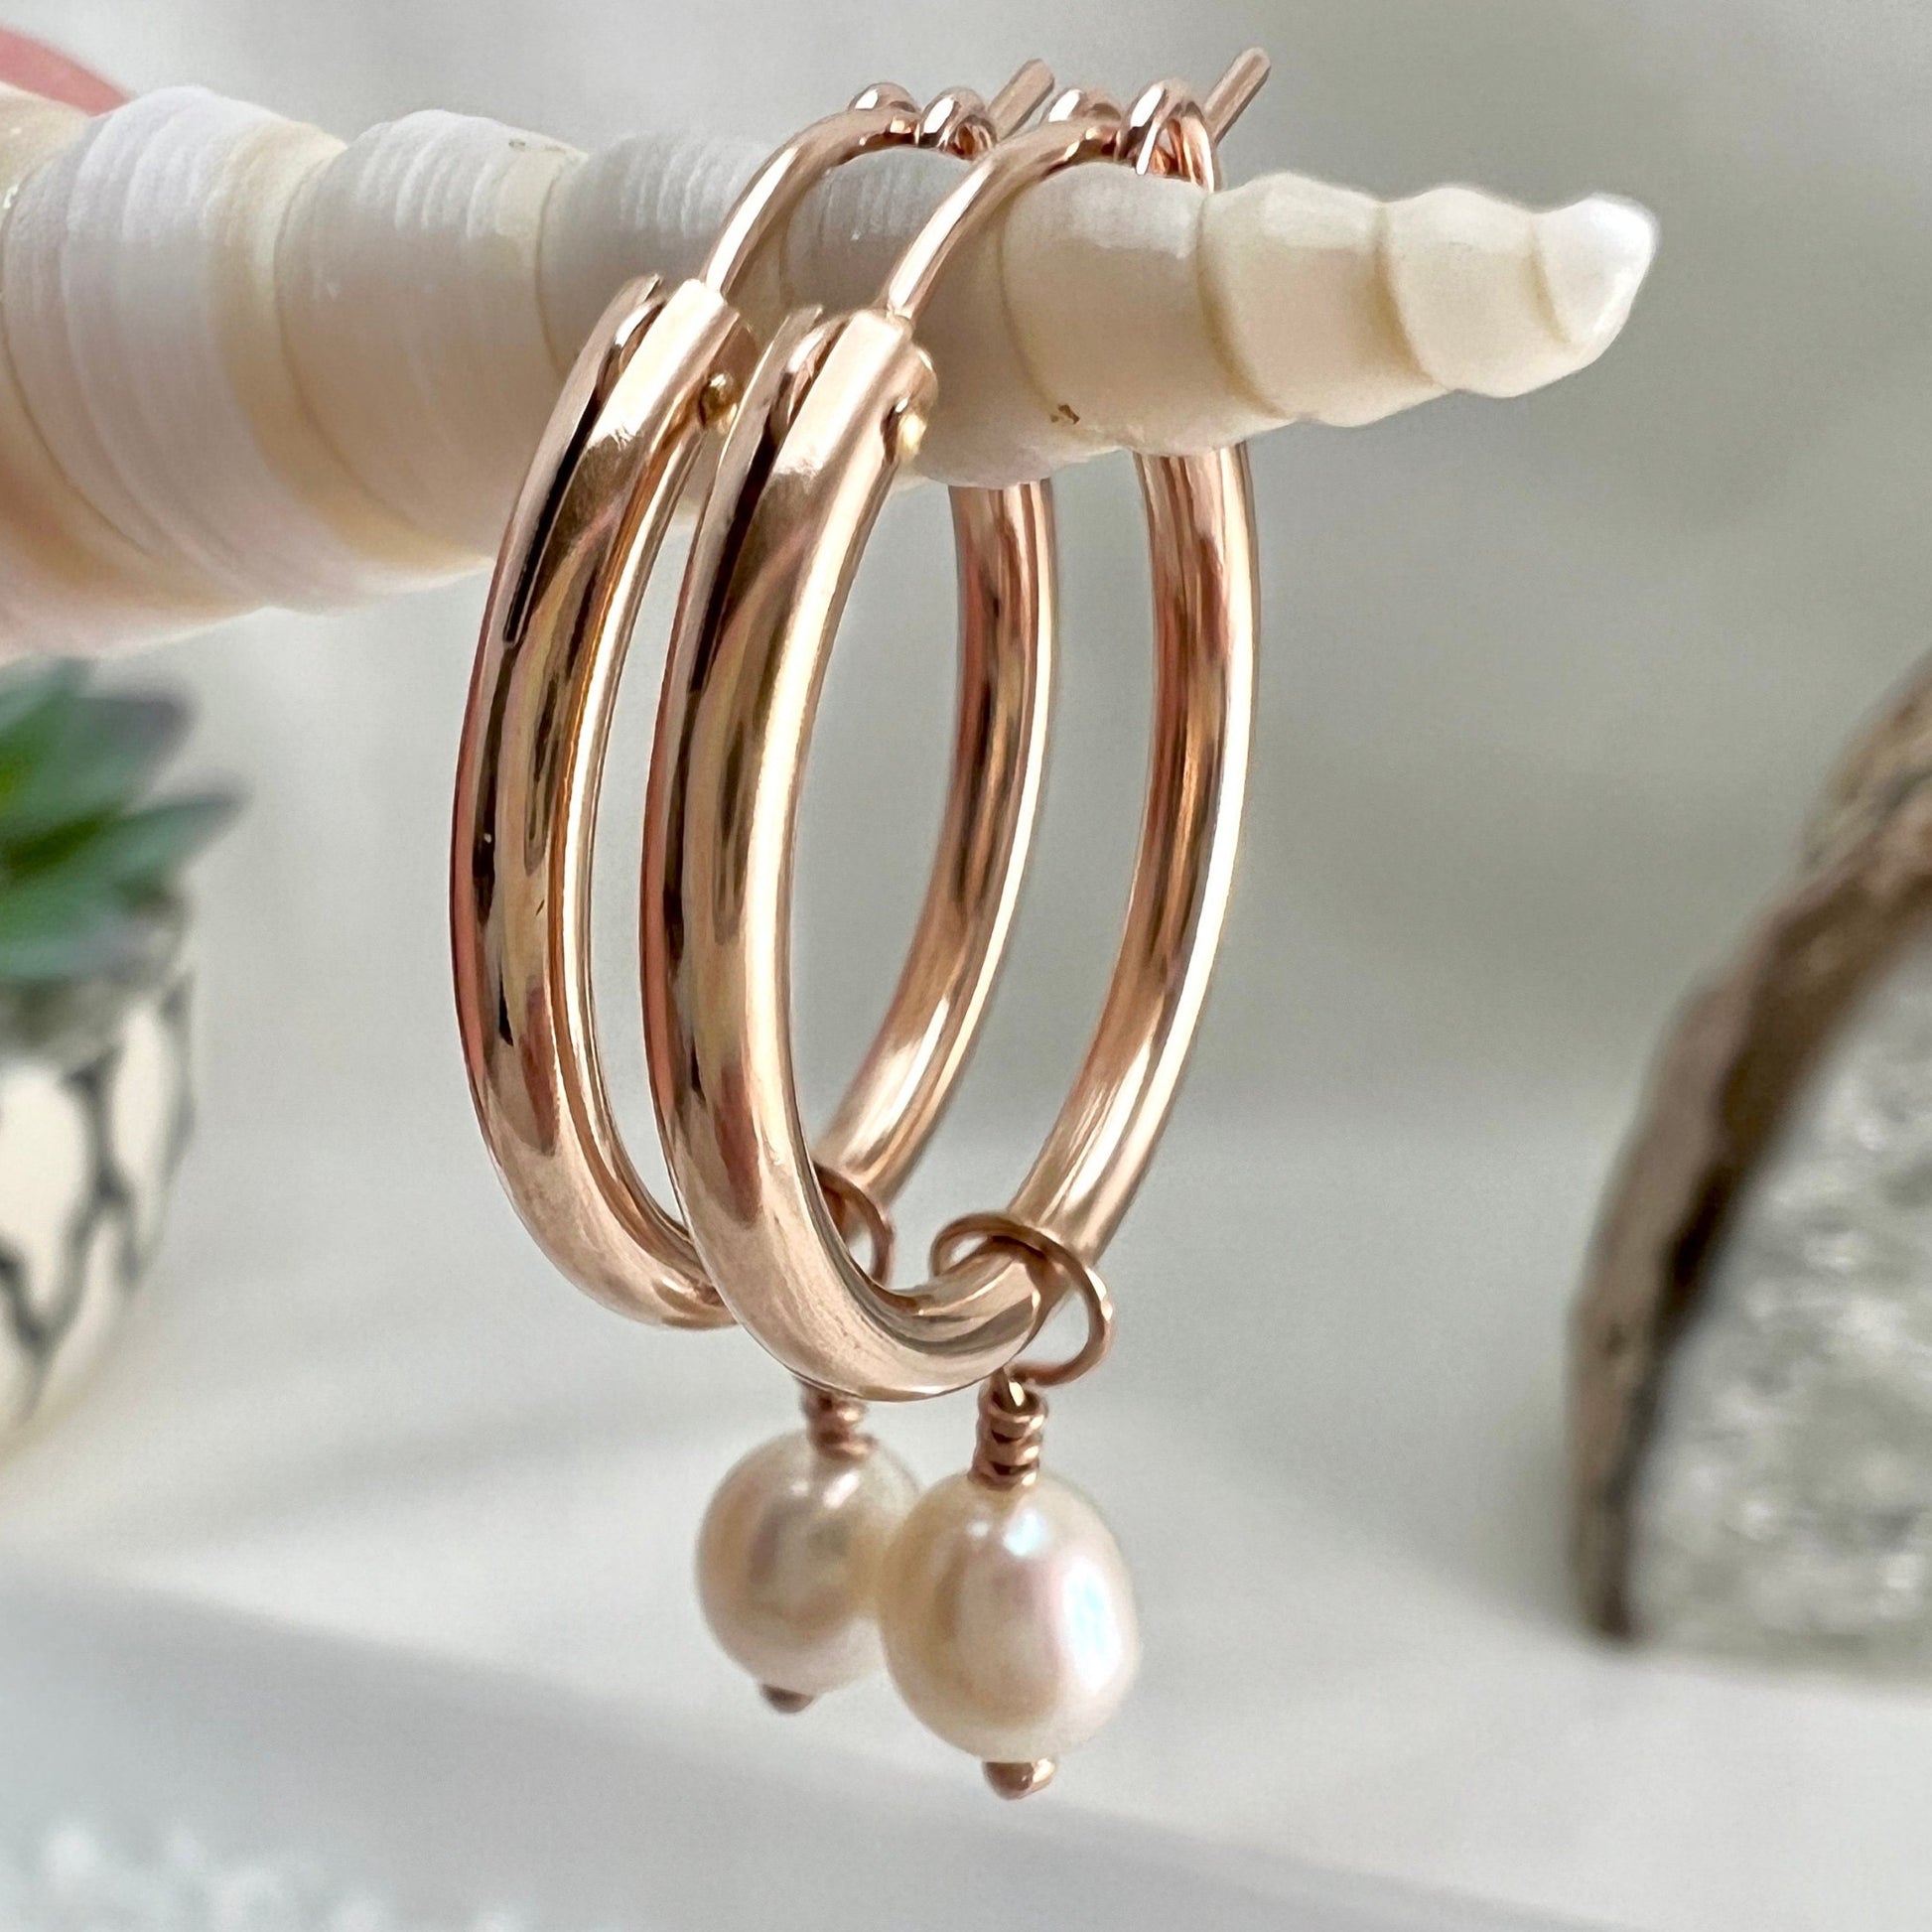 Rose Gold Filled Hoops with Pearl Dangle